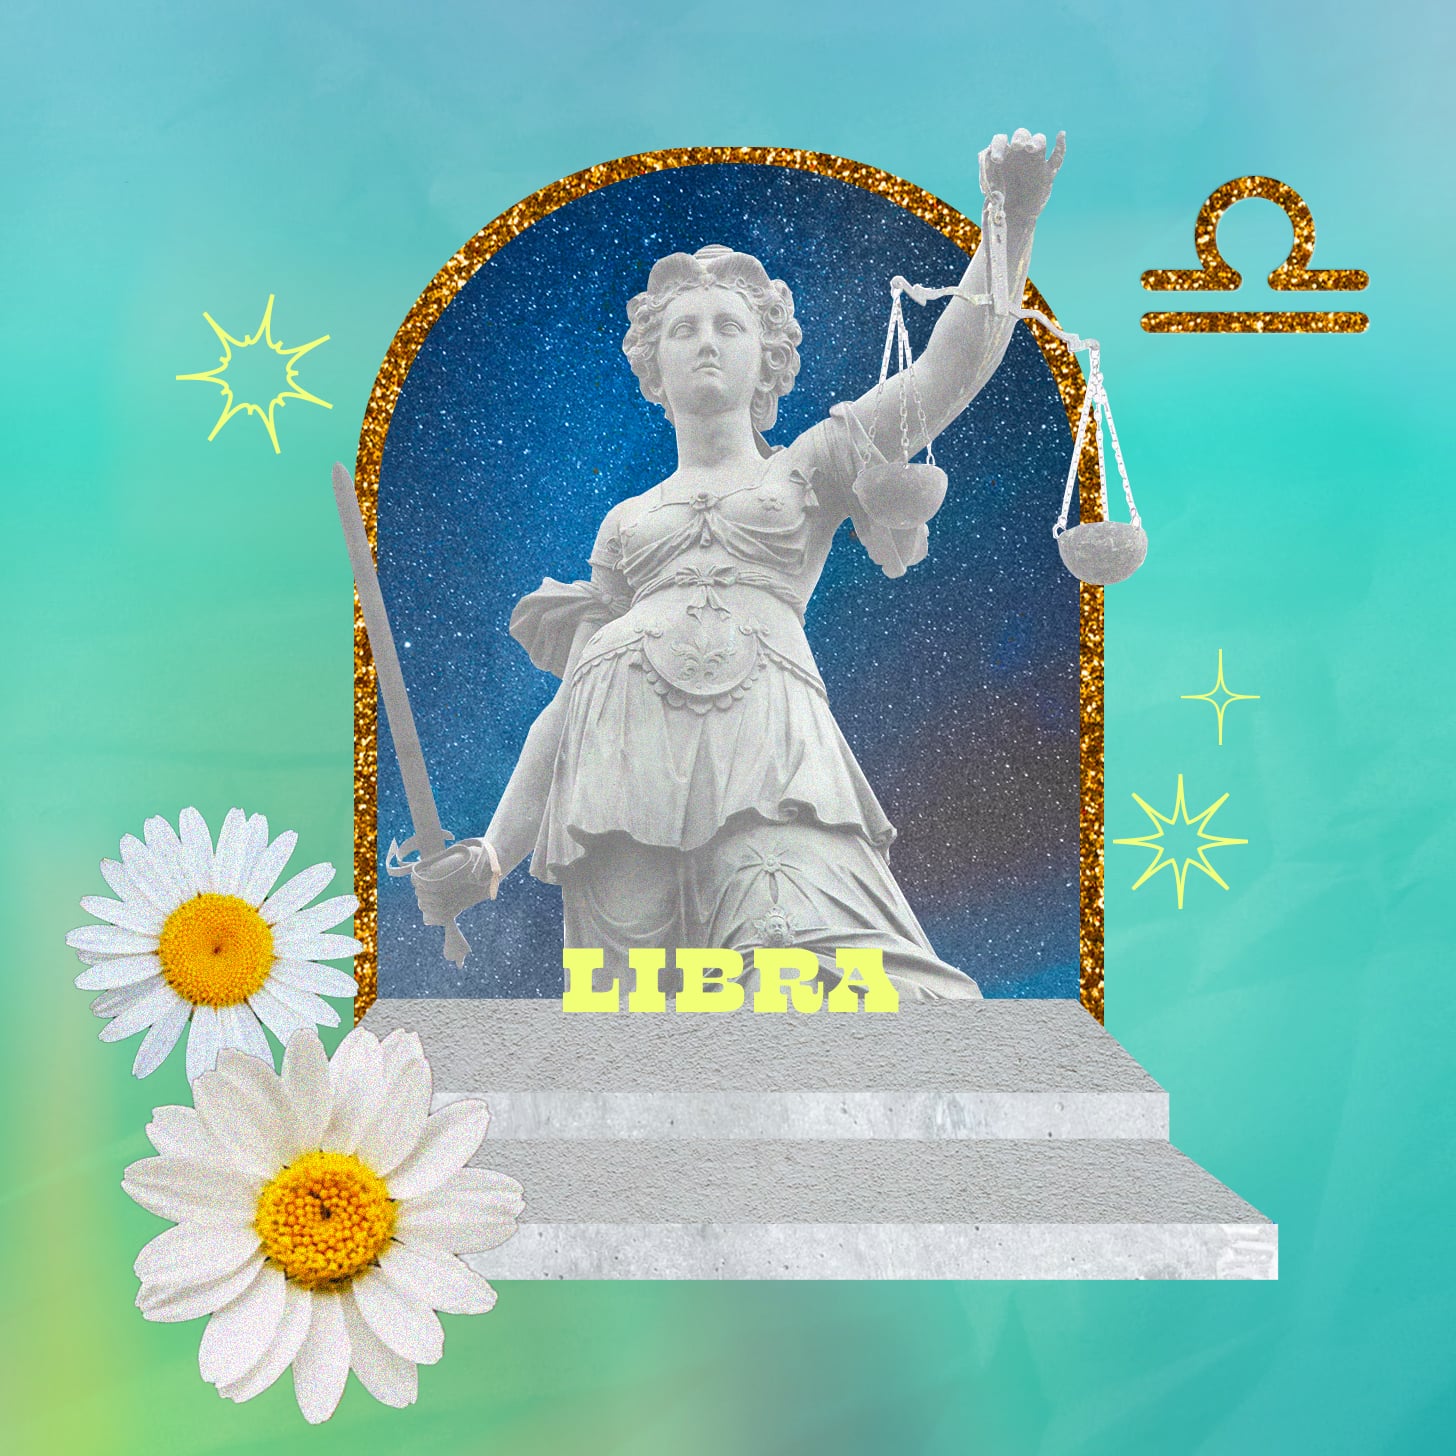 Libra weekly horoscope for August 21, 2022